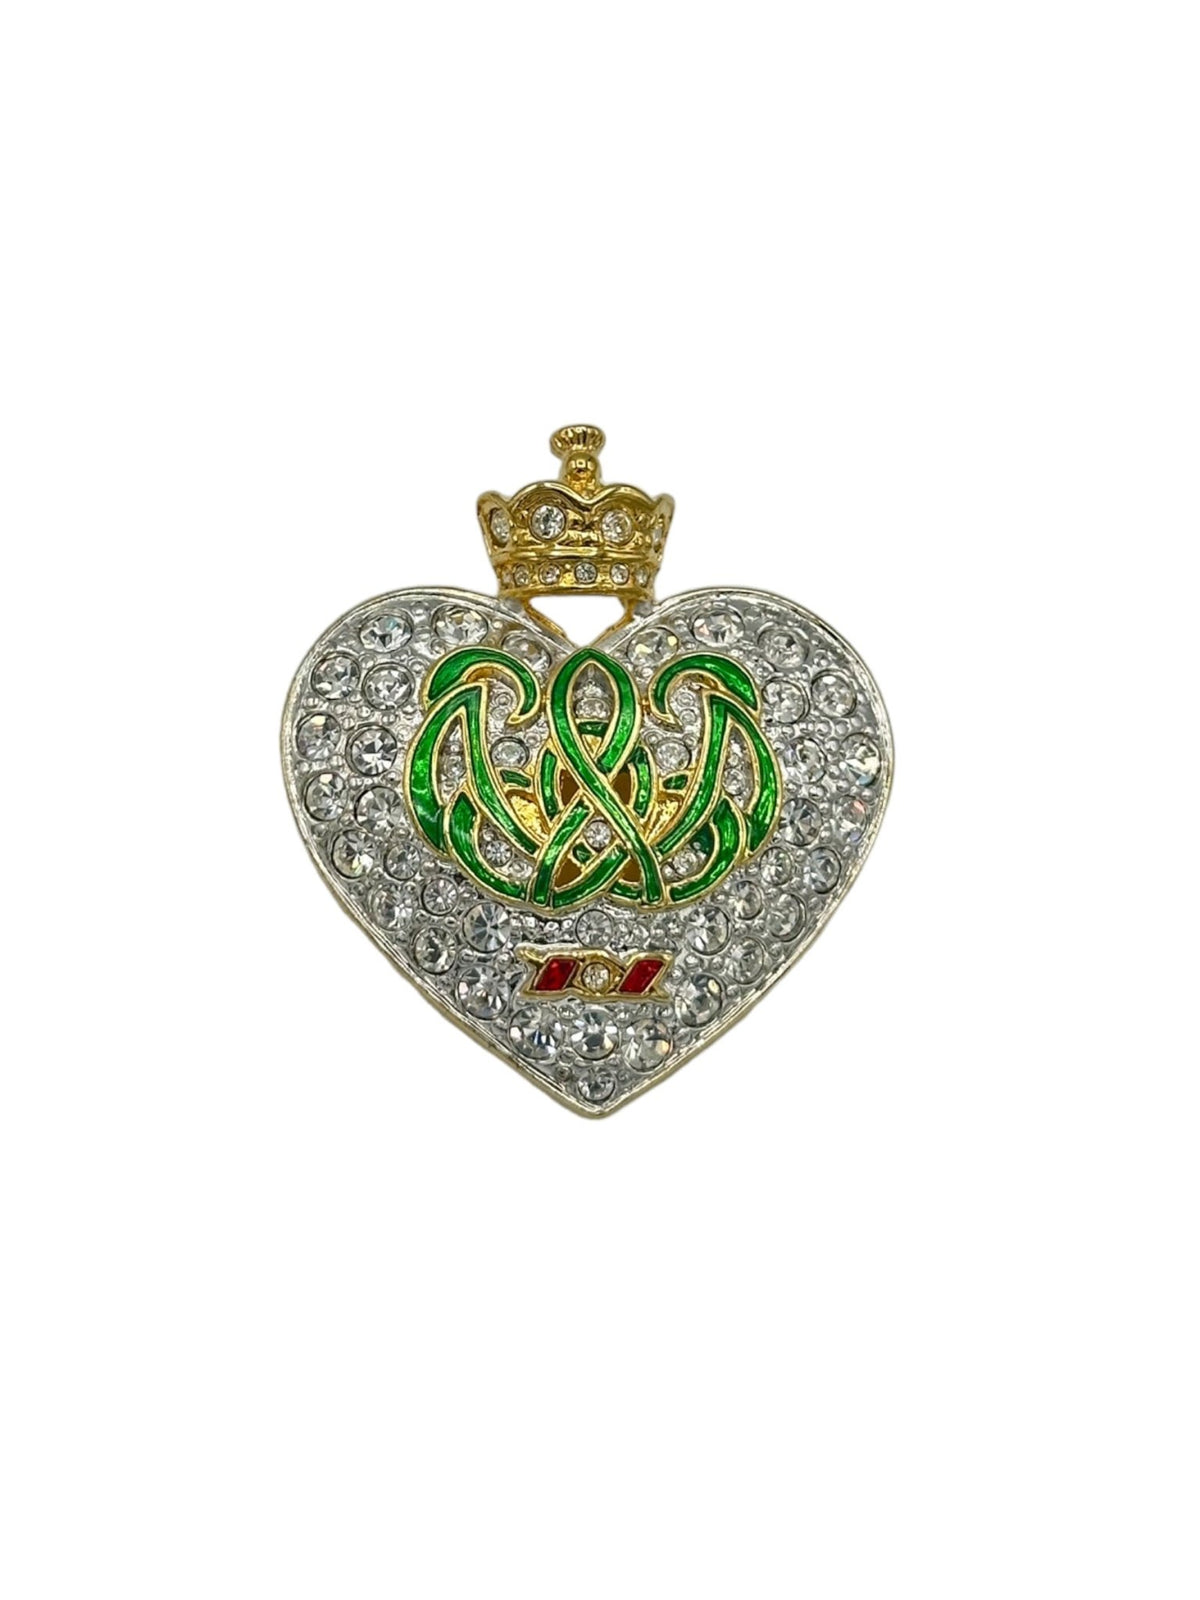 Kenneth Jay Lane Treasures of the Duchess Rhinestone Heart Brooch - 24 Wishes Vintage Jewelry